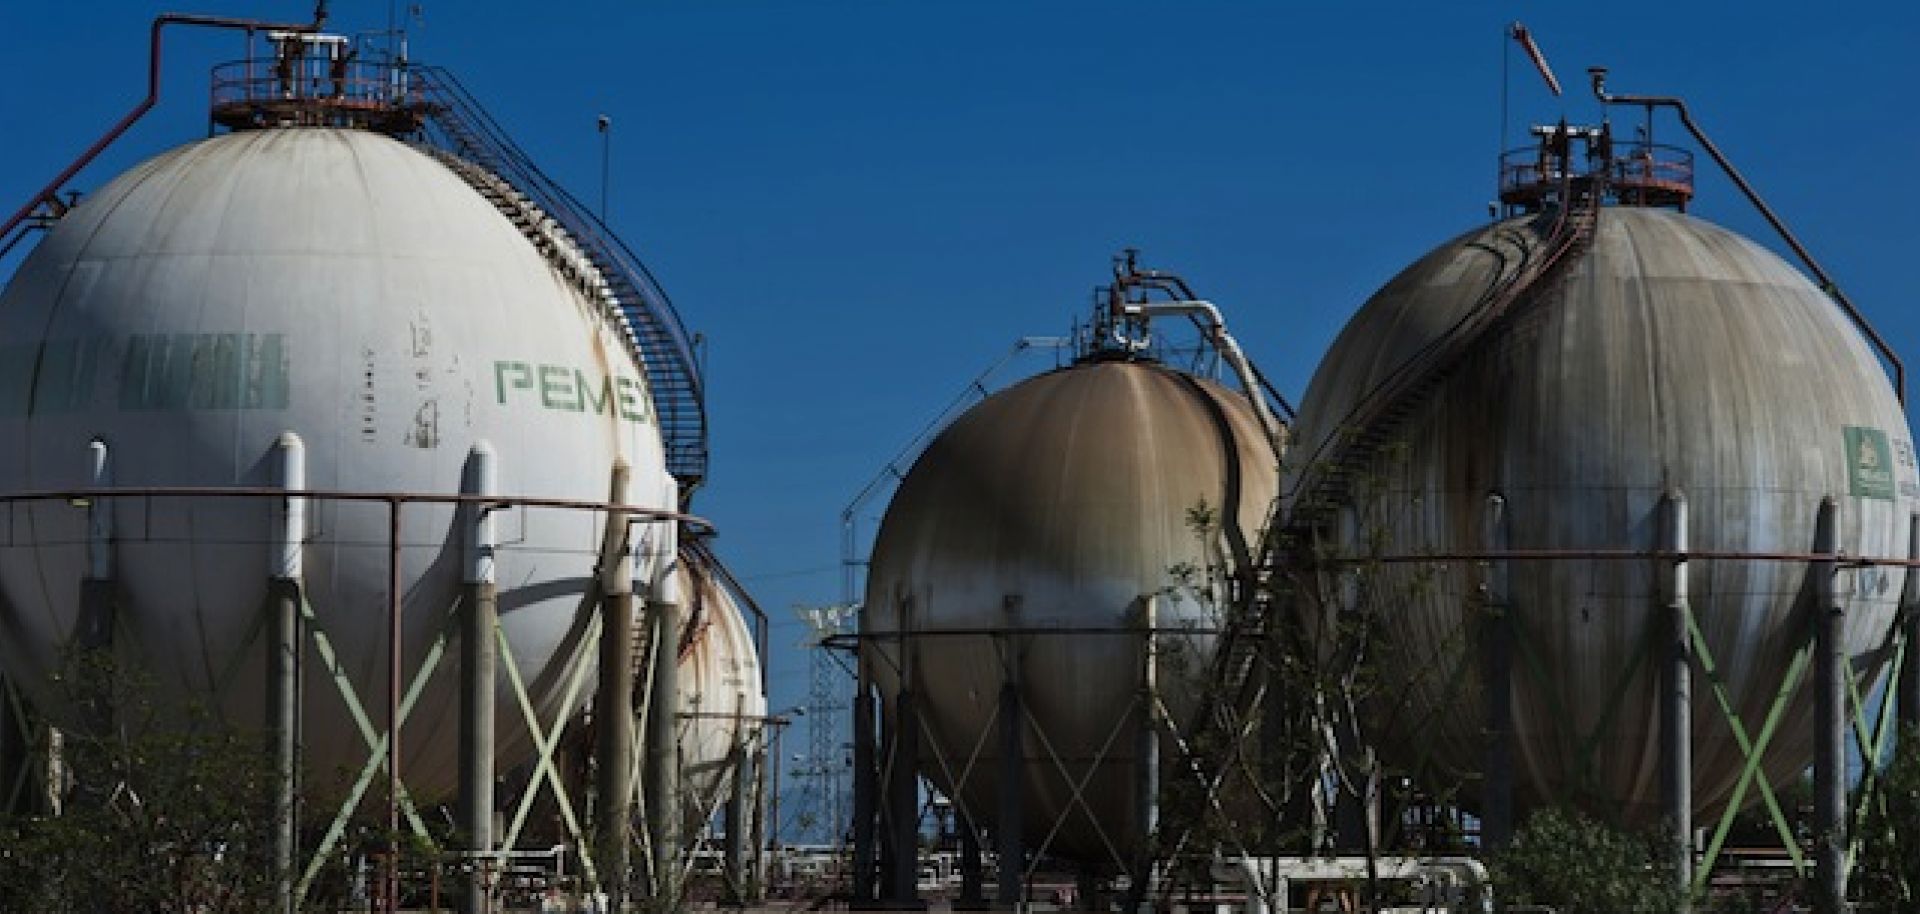 Natural gas tanks at a Pemex refinery in Tula, Hidalgo state.